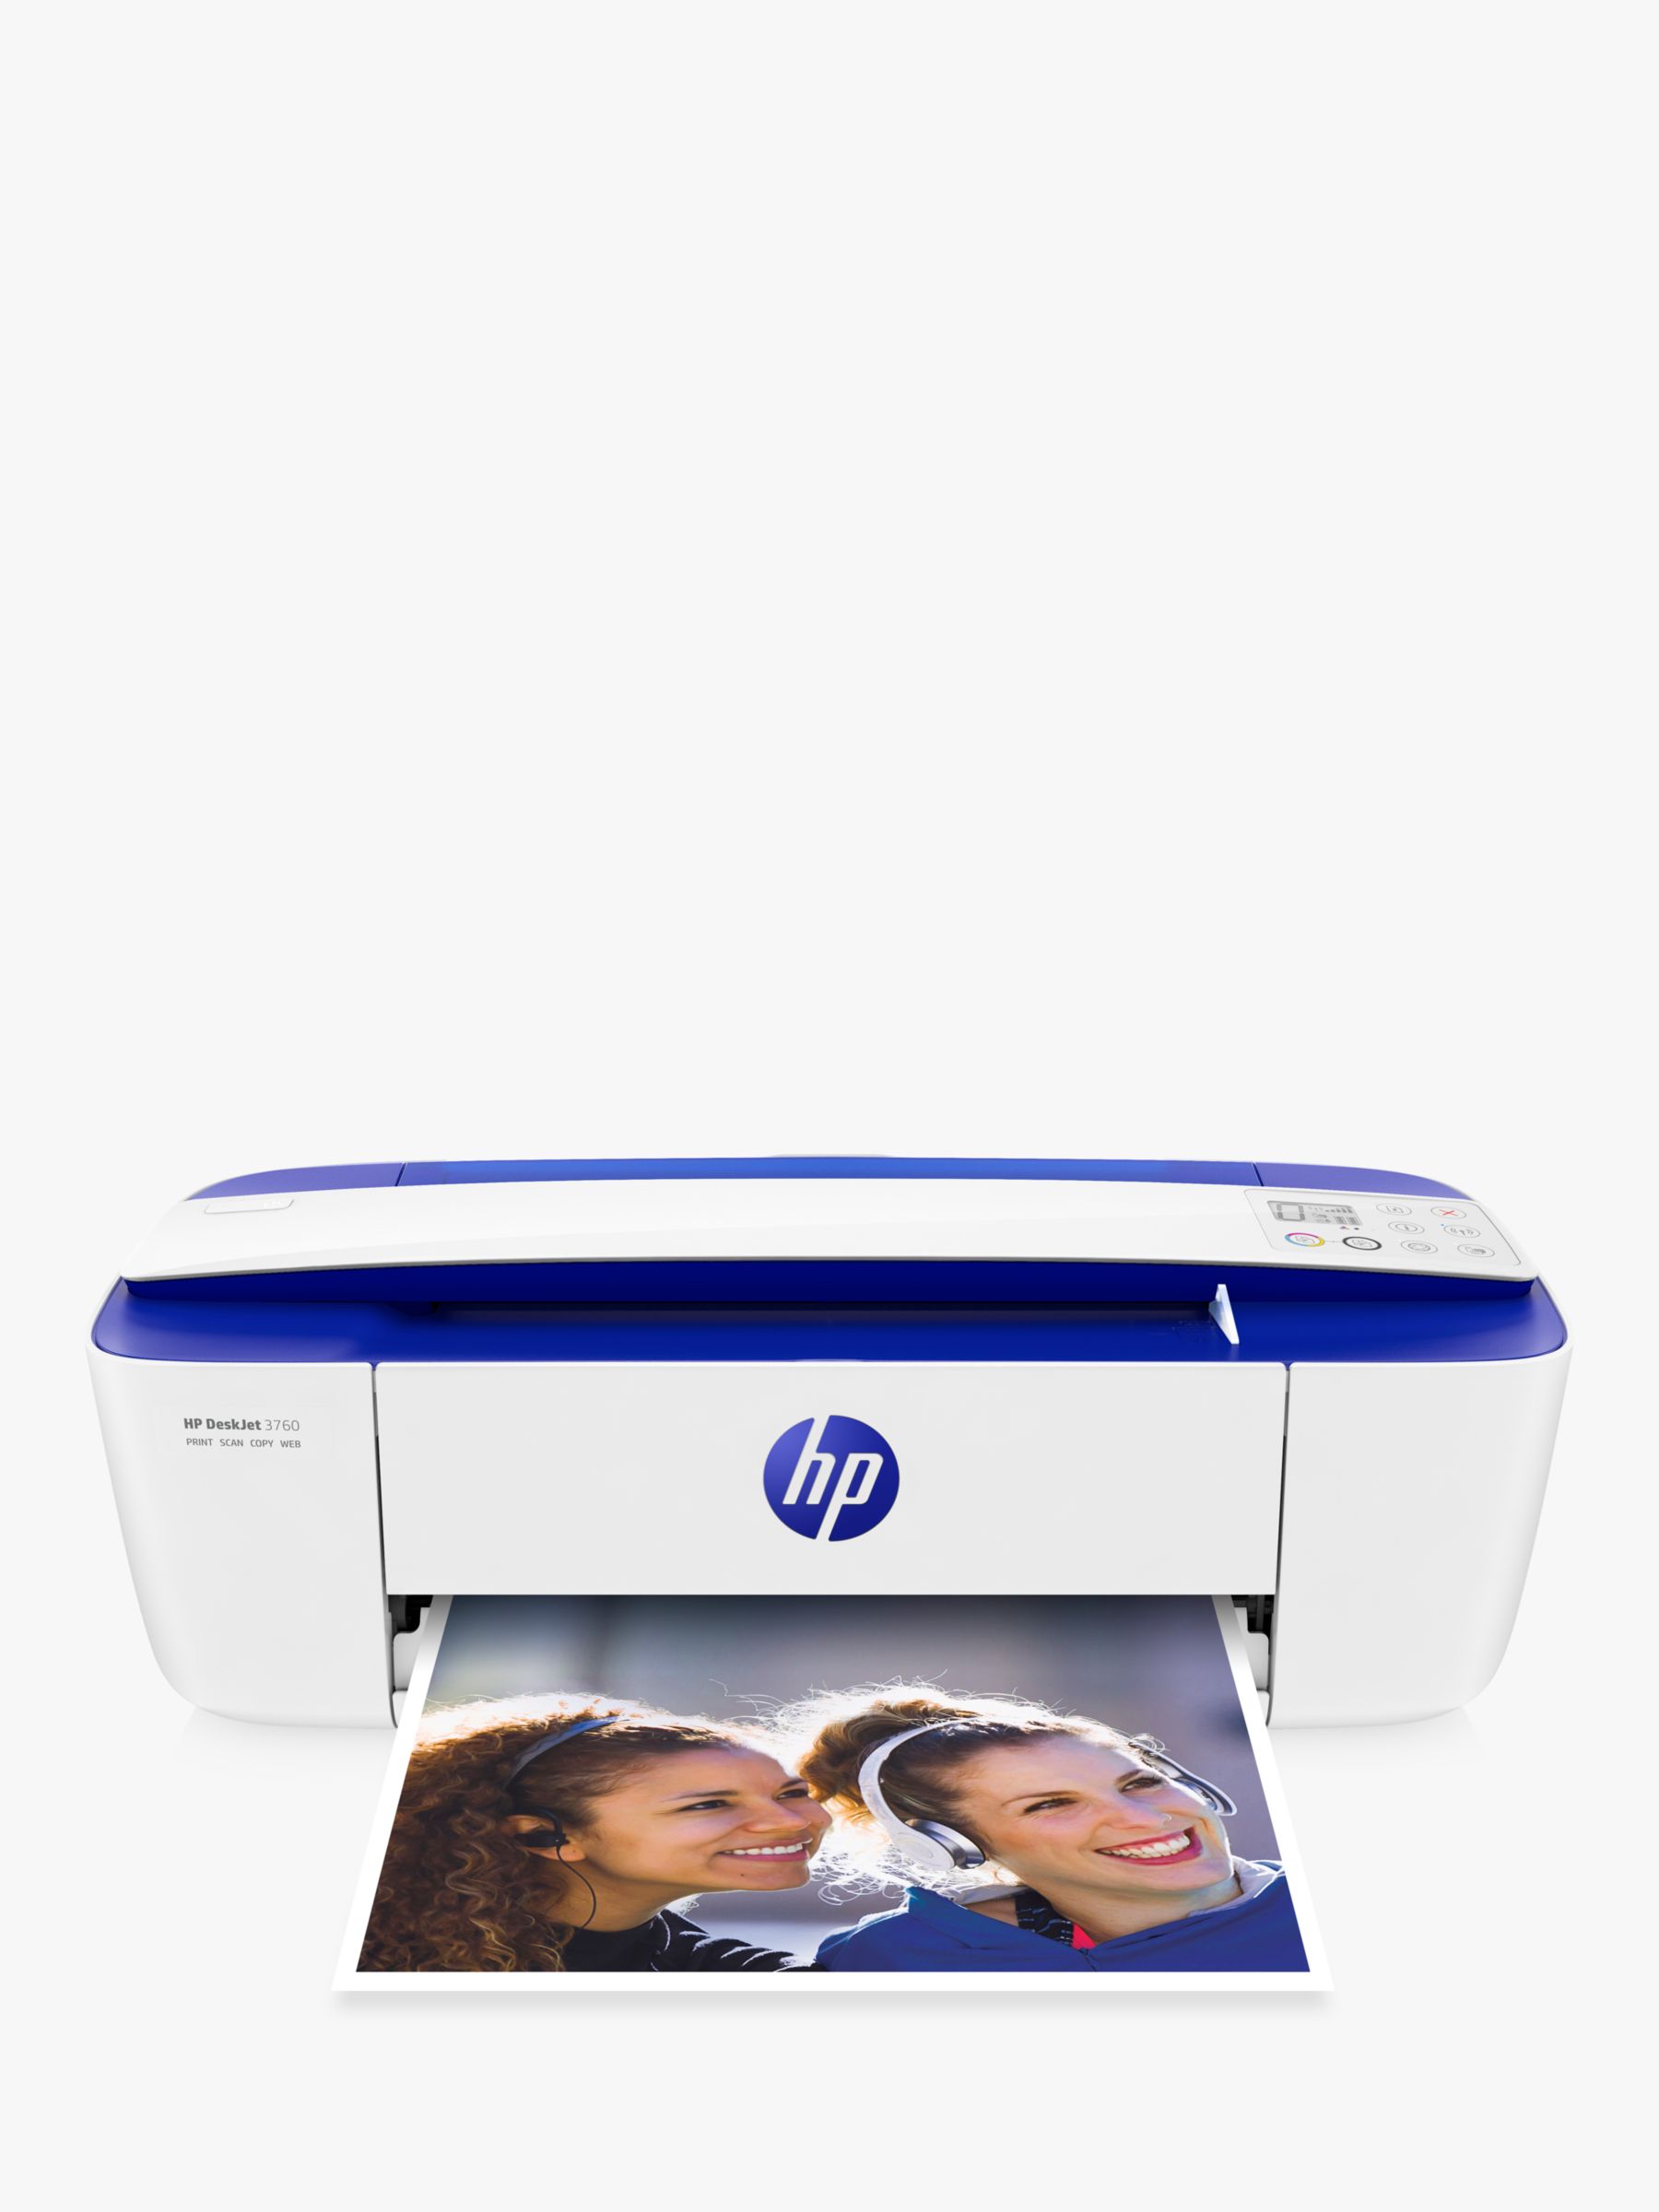 HP Deskjet 3760 All-in-One Wireless HP Instant Ink Compatible with 4 Month Trial,